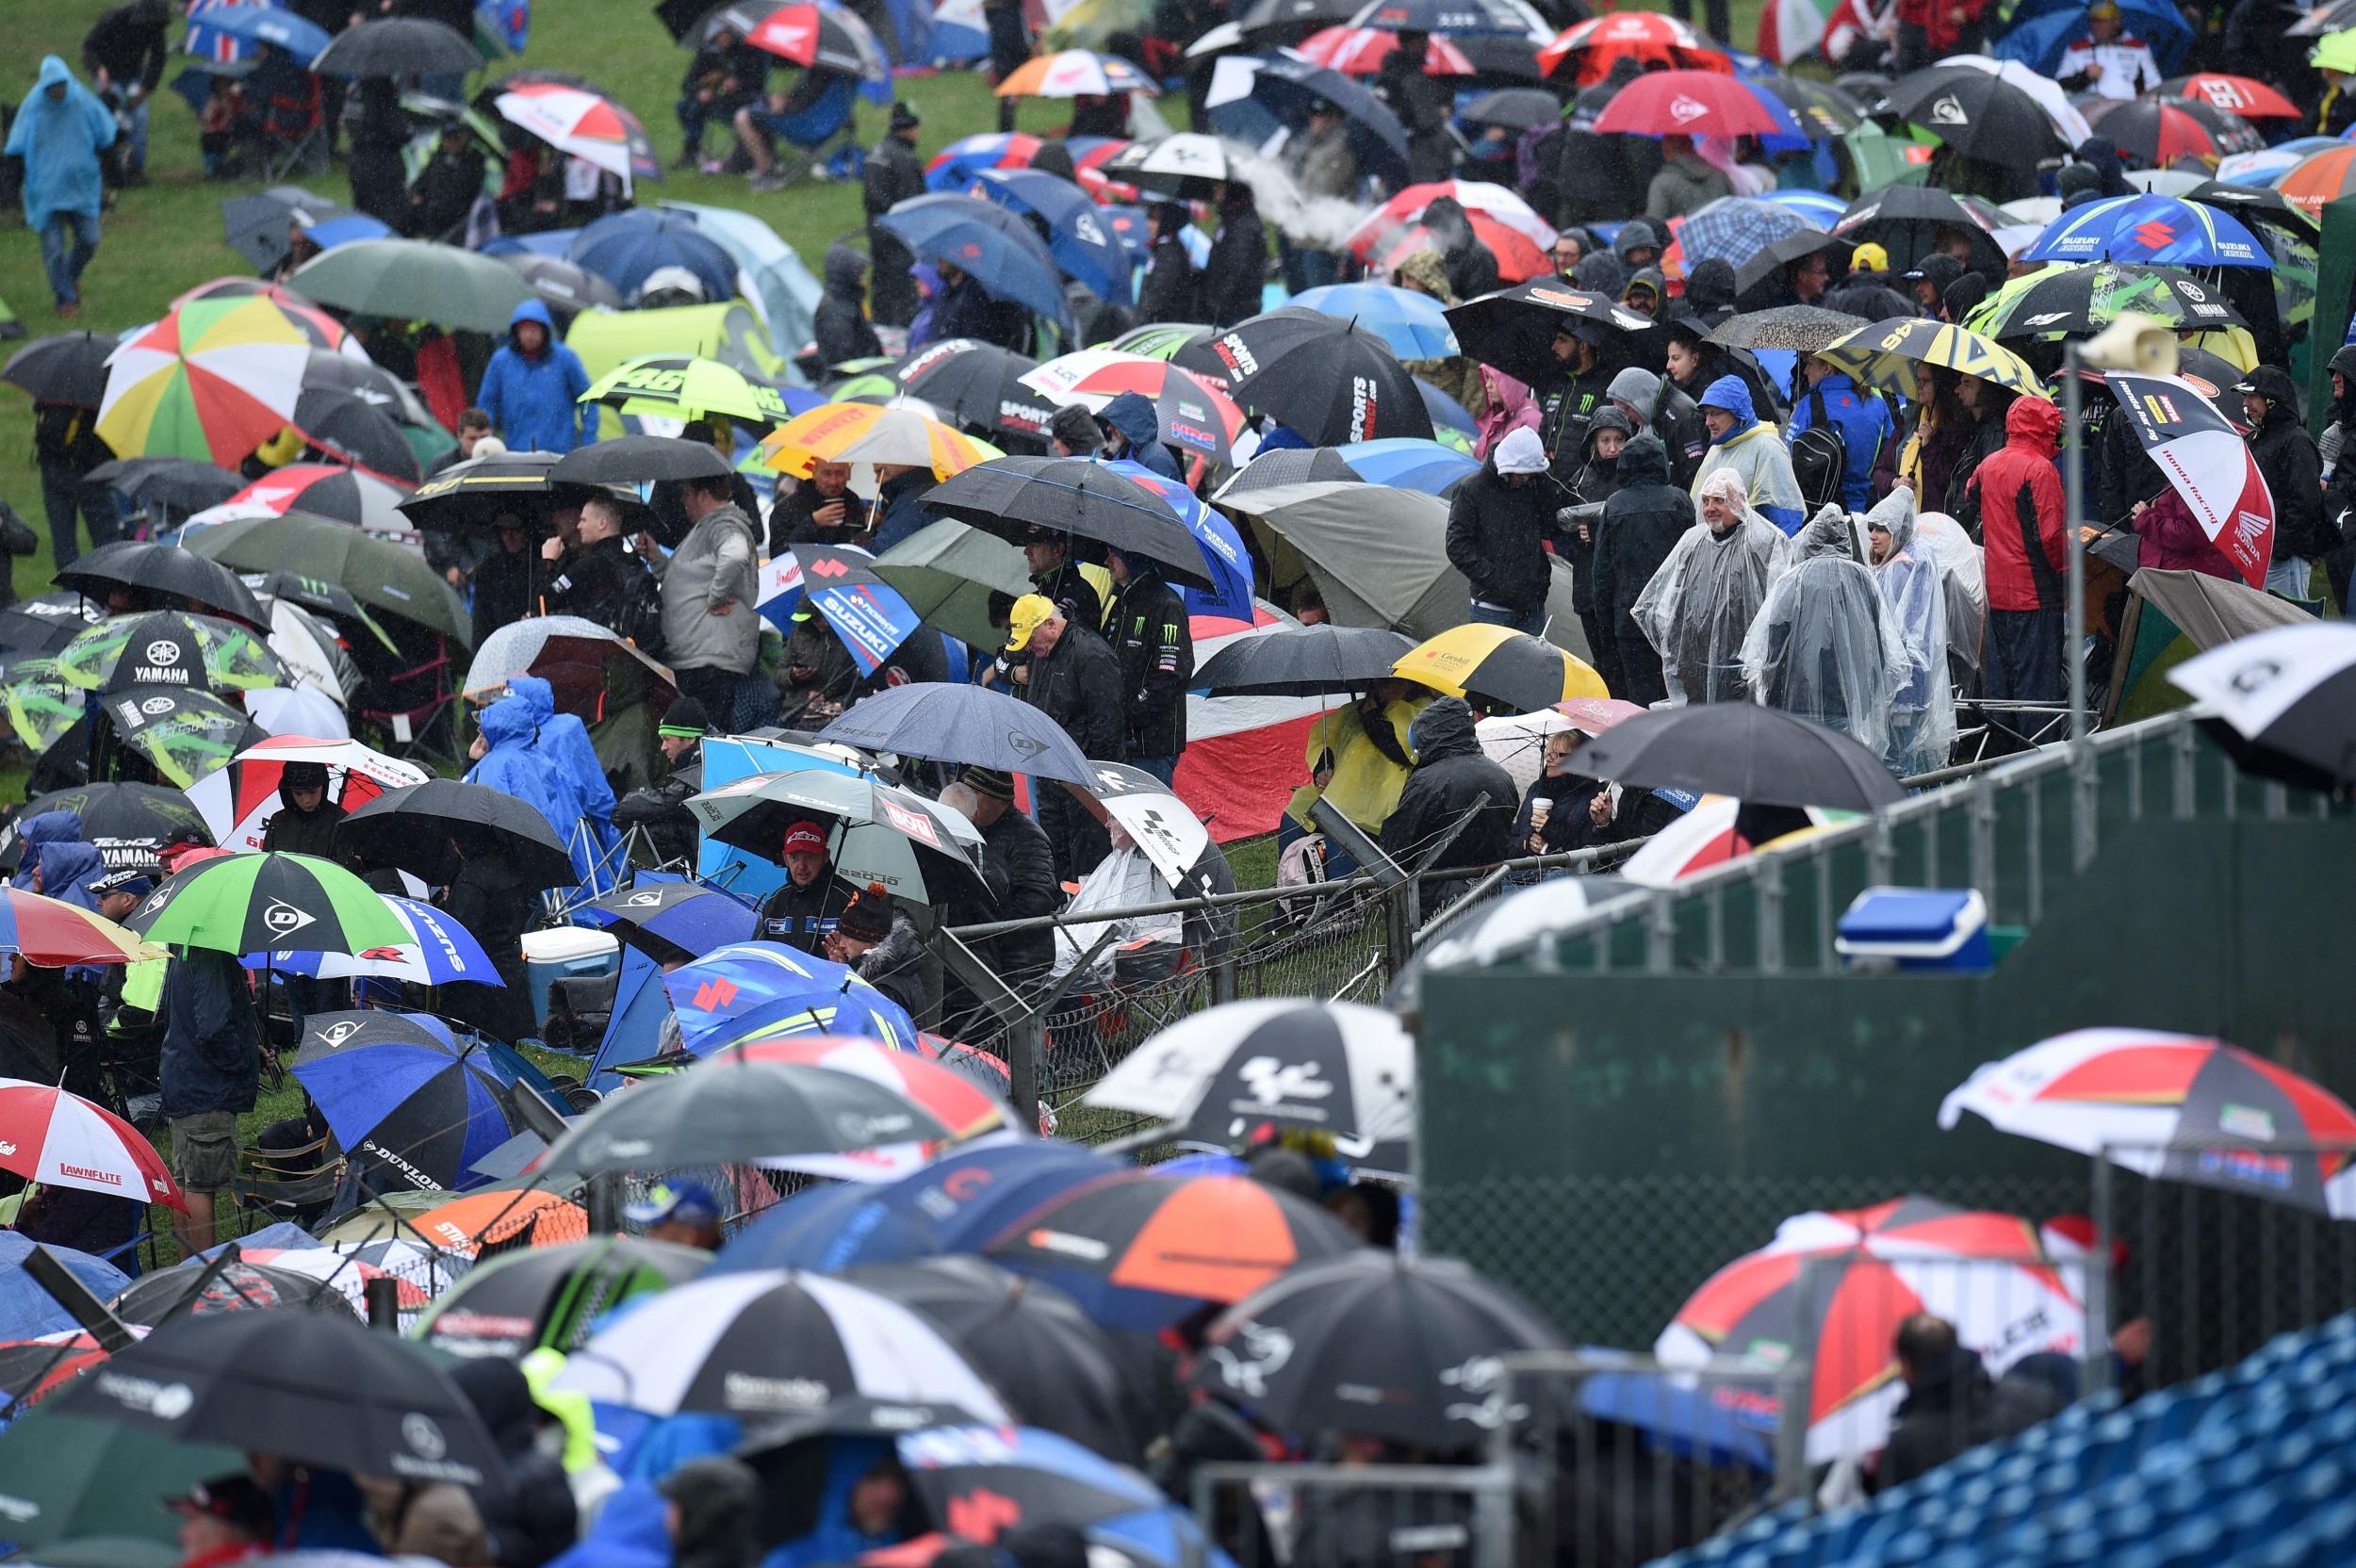 Thousands of fans were left disappointed as all races were cancelled